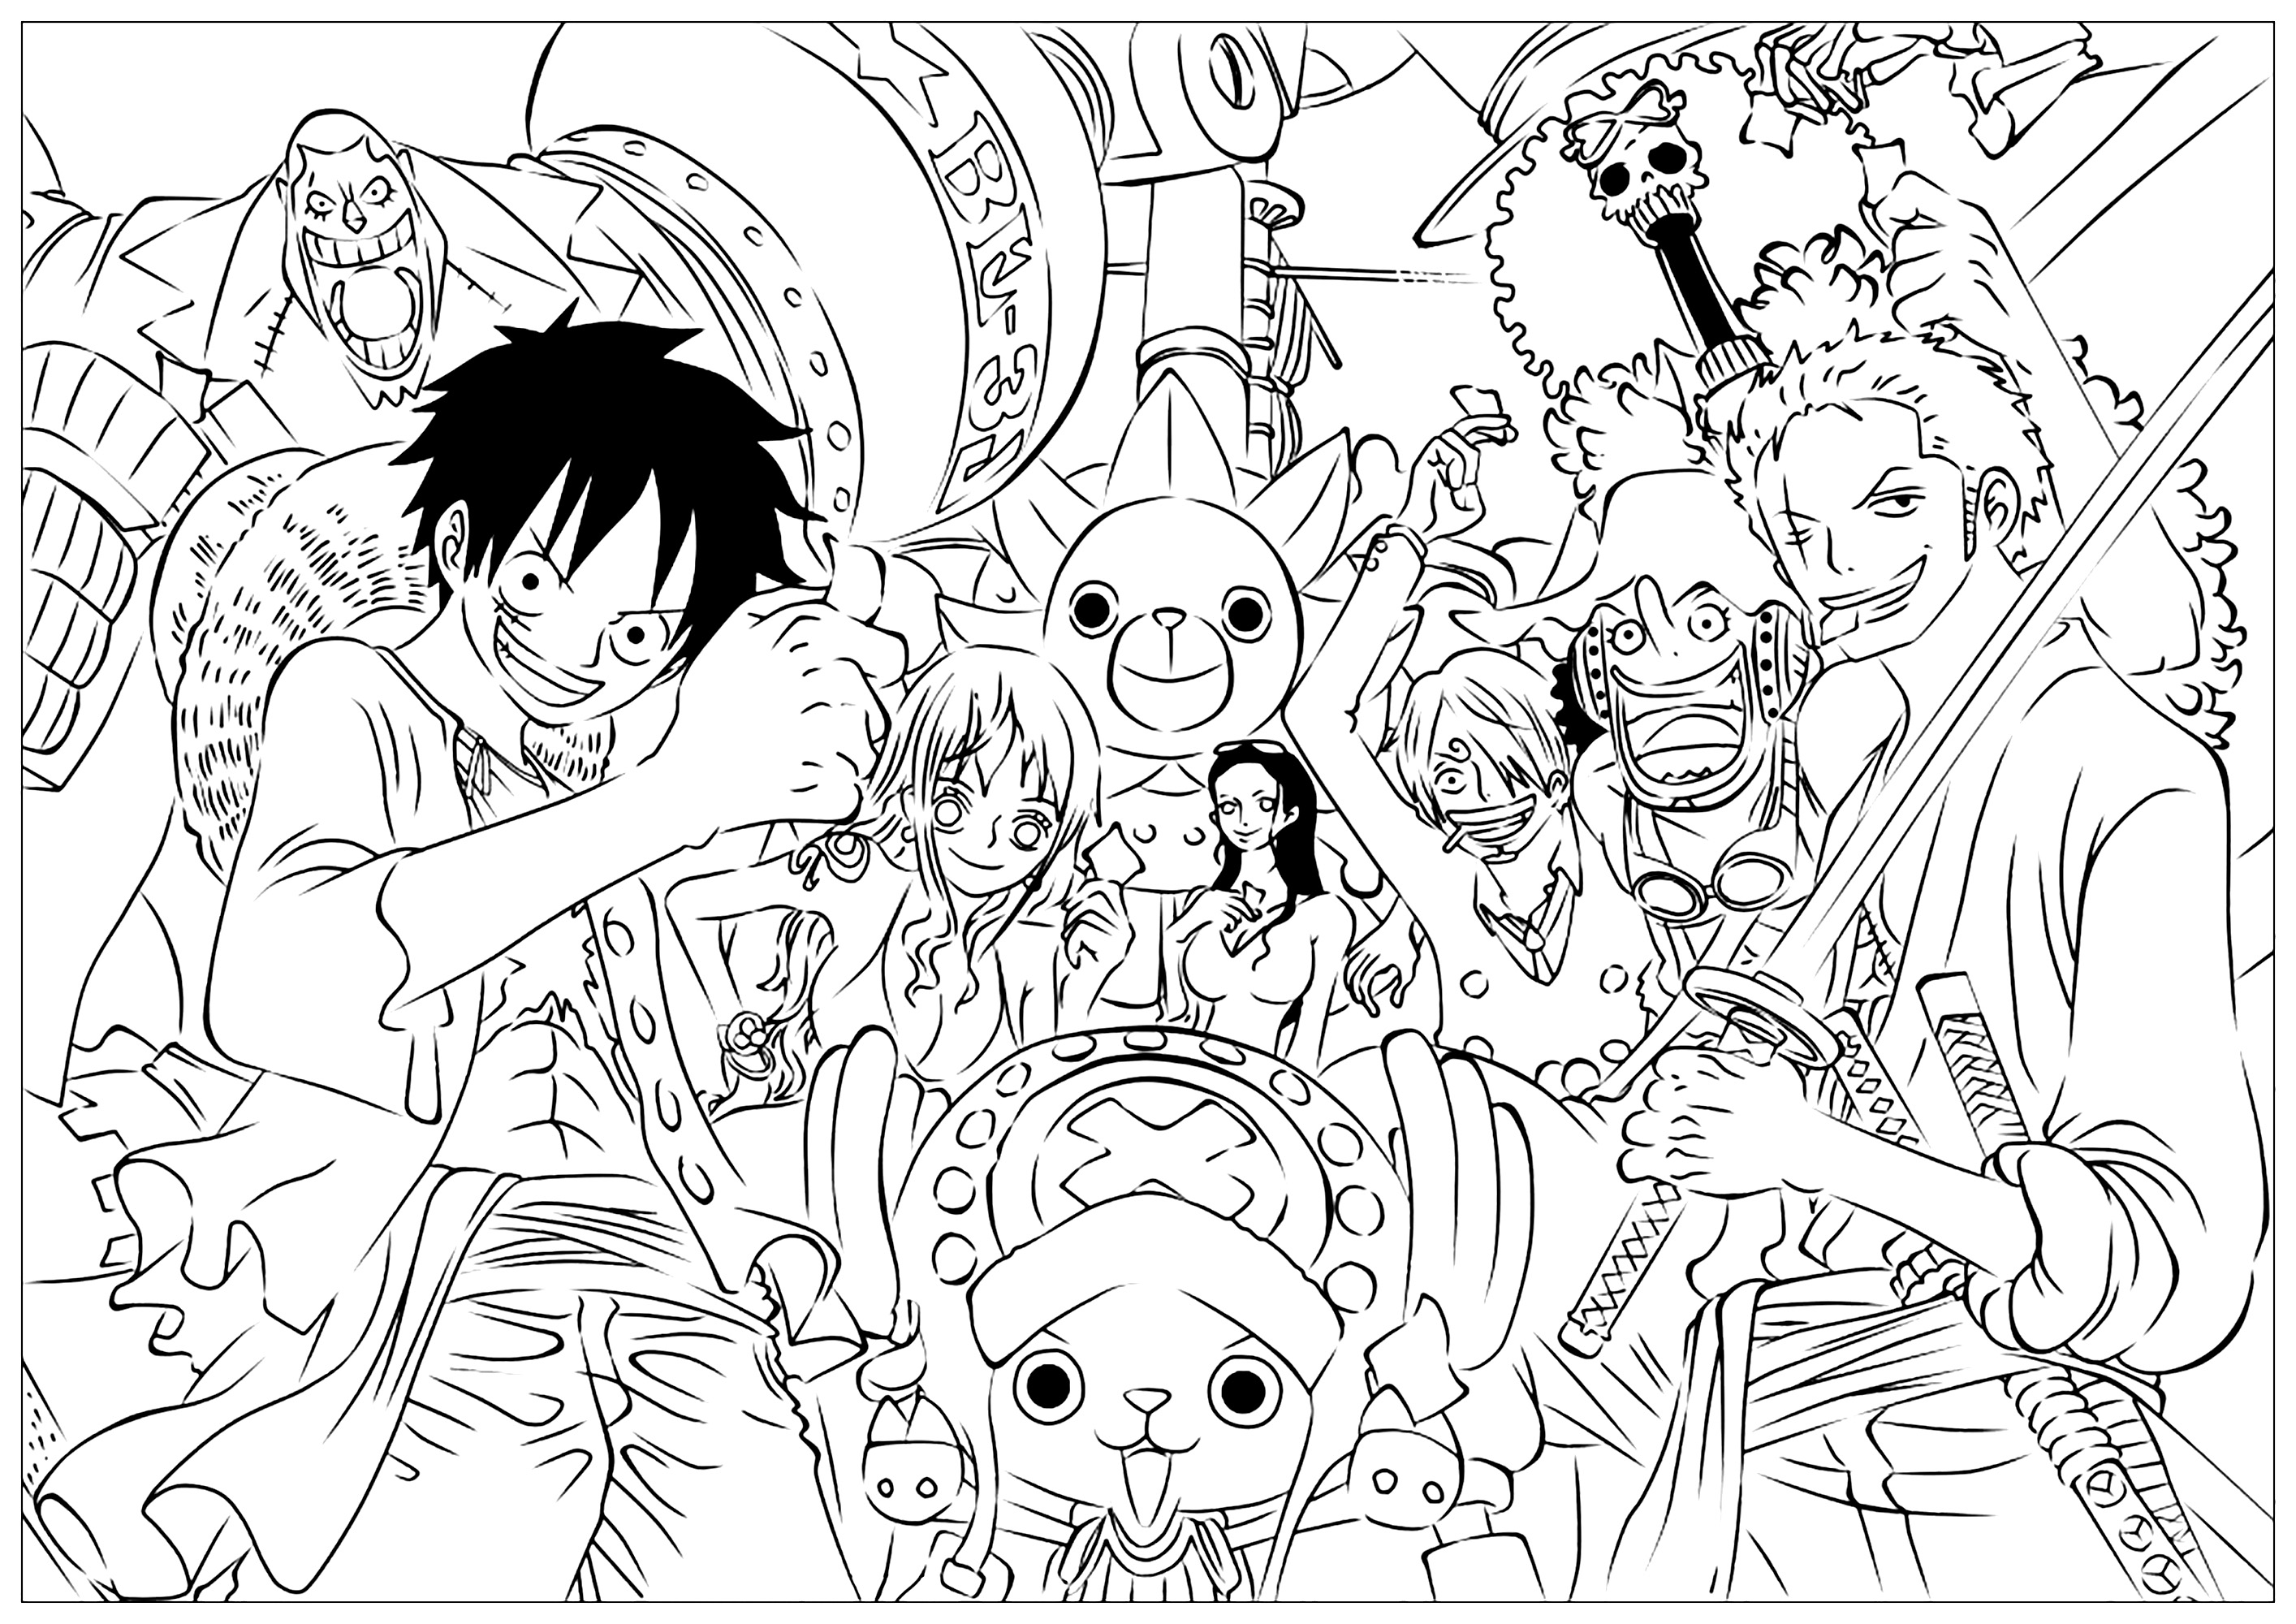 One piece characters in a coloring book full of details. Here are the main One Piece characters: Monkey D. Luffy is the leader who wants to become King of the Pirates. Roronoa Zoro is a three-bladed swordsman; Nami, the navigator; Usopp, the sniper and storyteller; Sanji, the cook; Tony Tony Chopper, the reindeer doctor; Nico Robin, the archaeologist; Franky, the cyborg carpenter; Brook, the skeleton musician; and Jinbei, the karateka fish-man. All are part of the Chapeau de Paille crew with unique dreams.